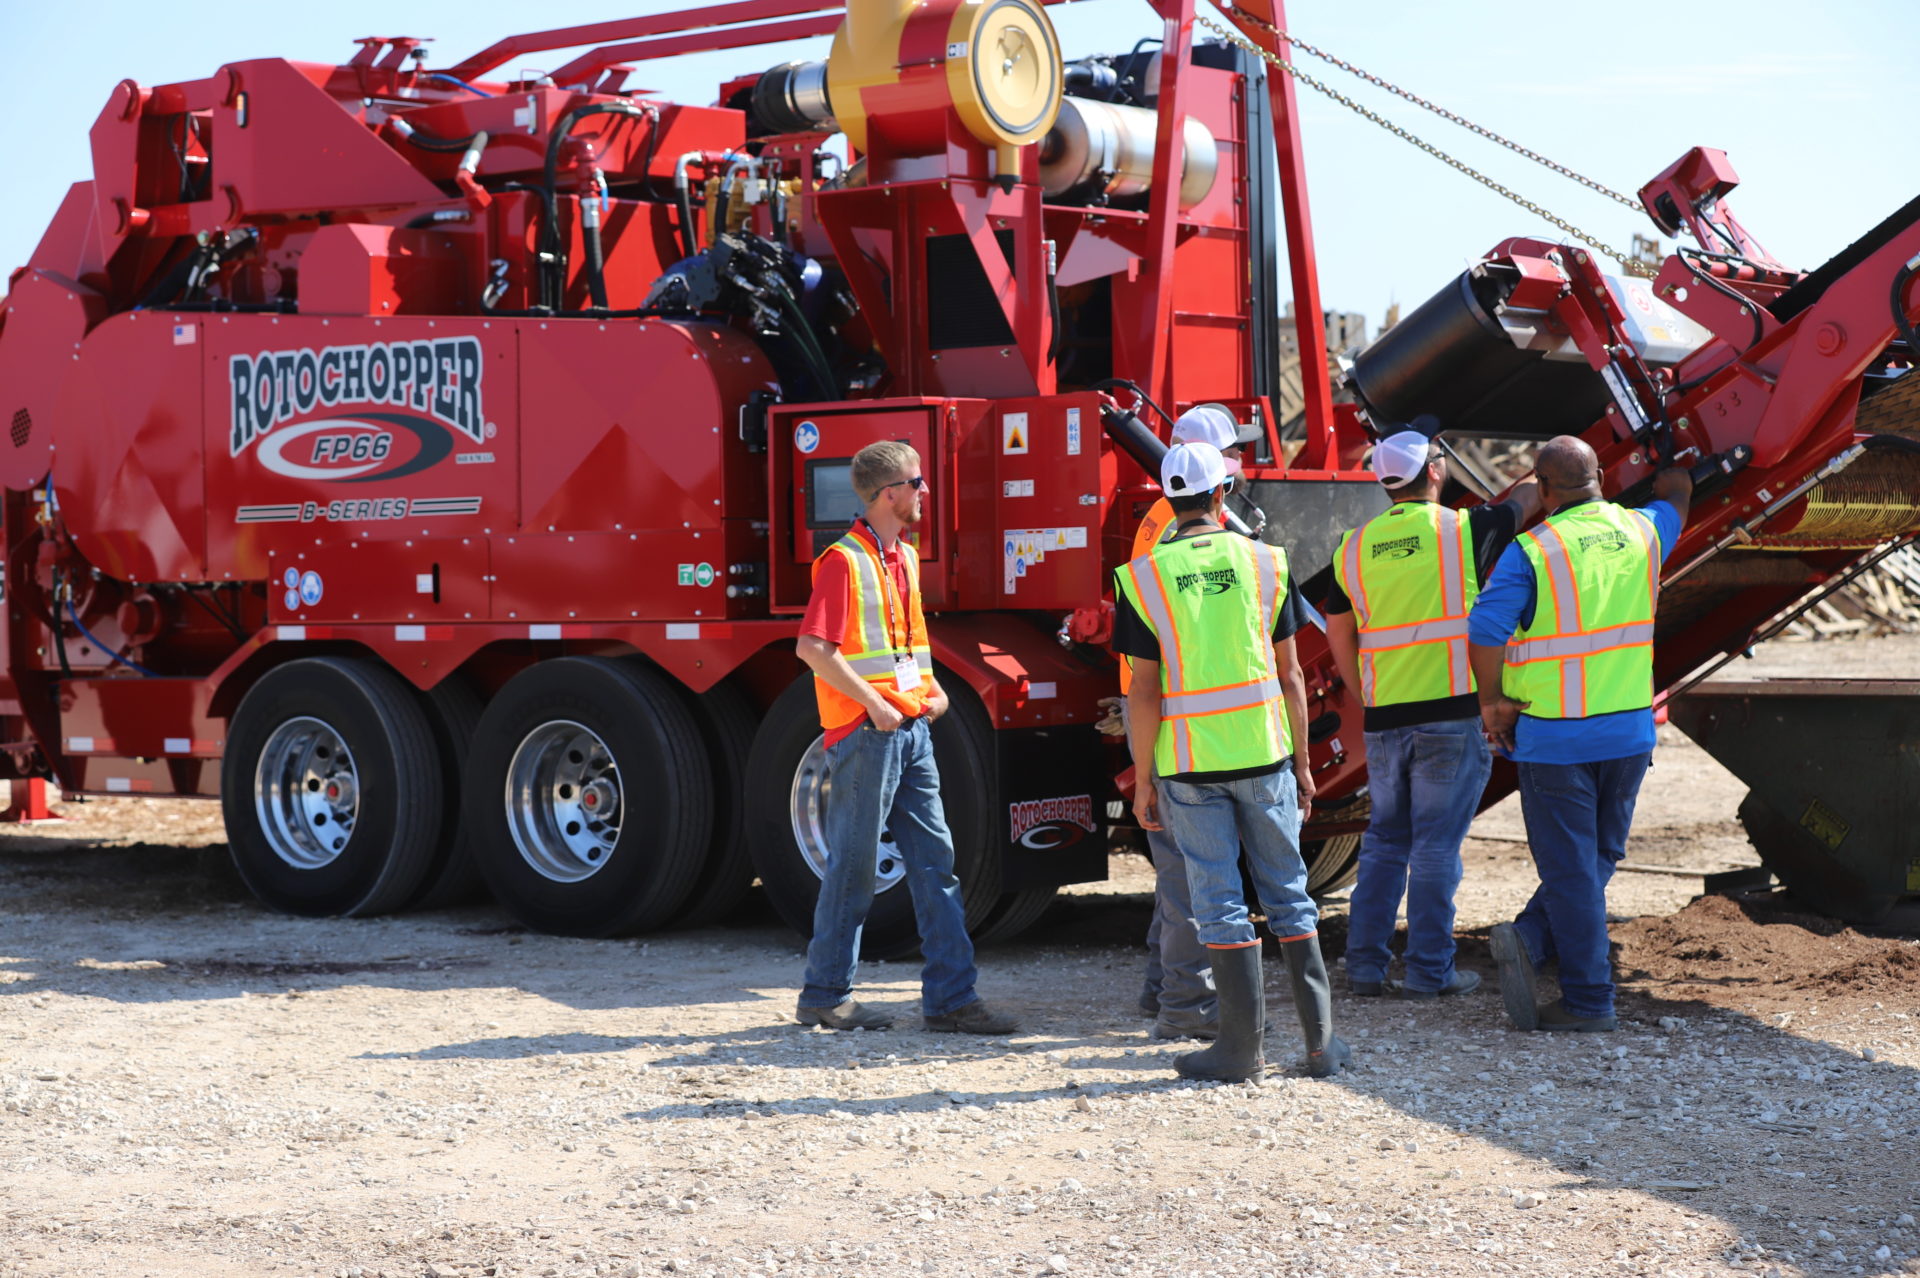 Large group of men with safety vests surrounding a large grinding machine at Rotochopper's field day event.